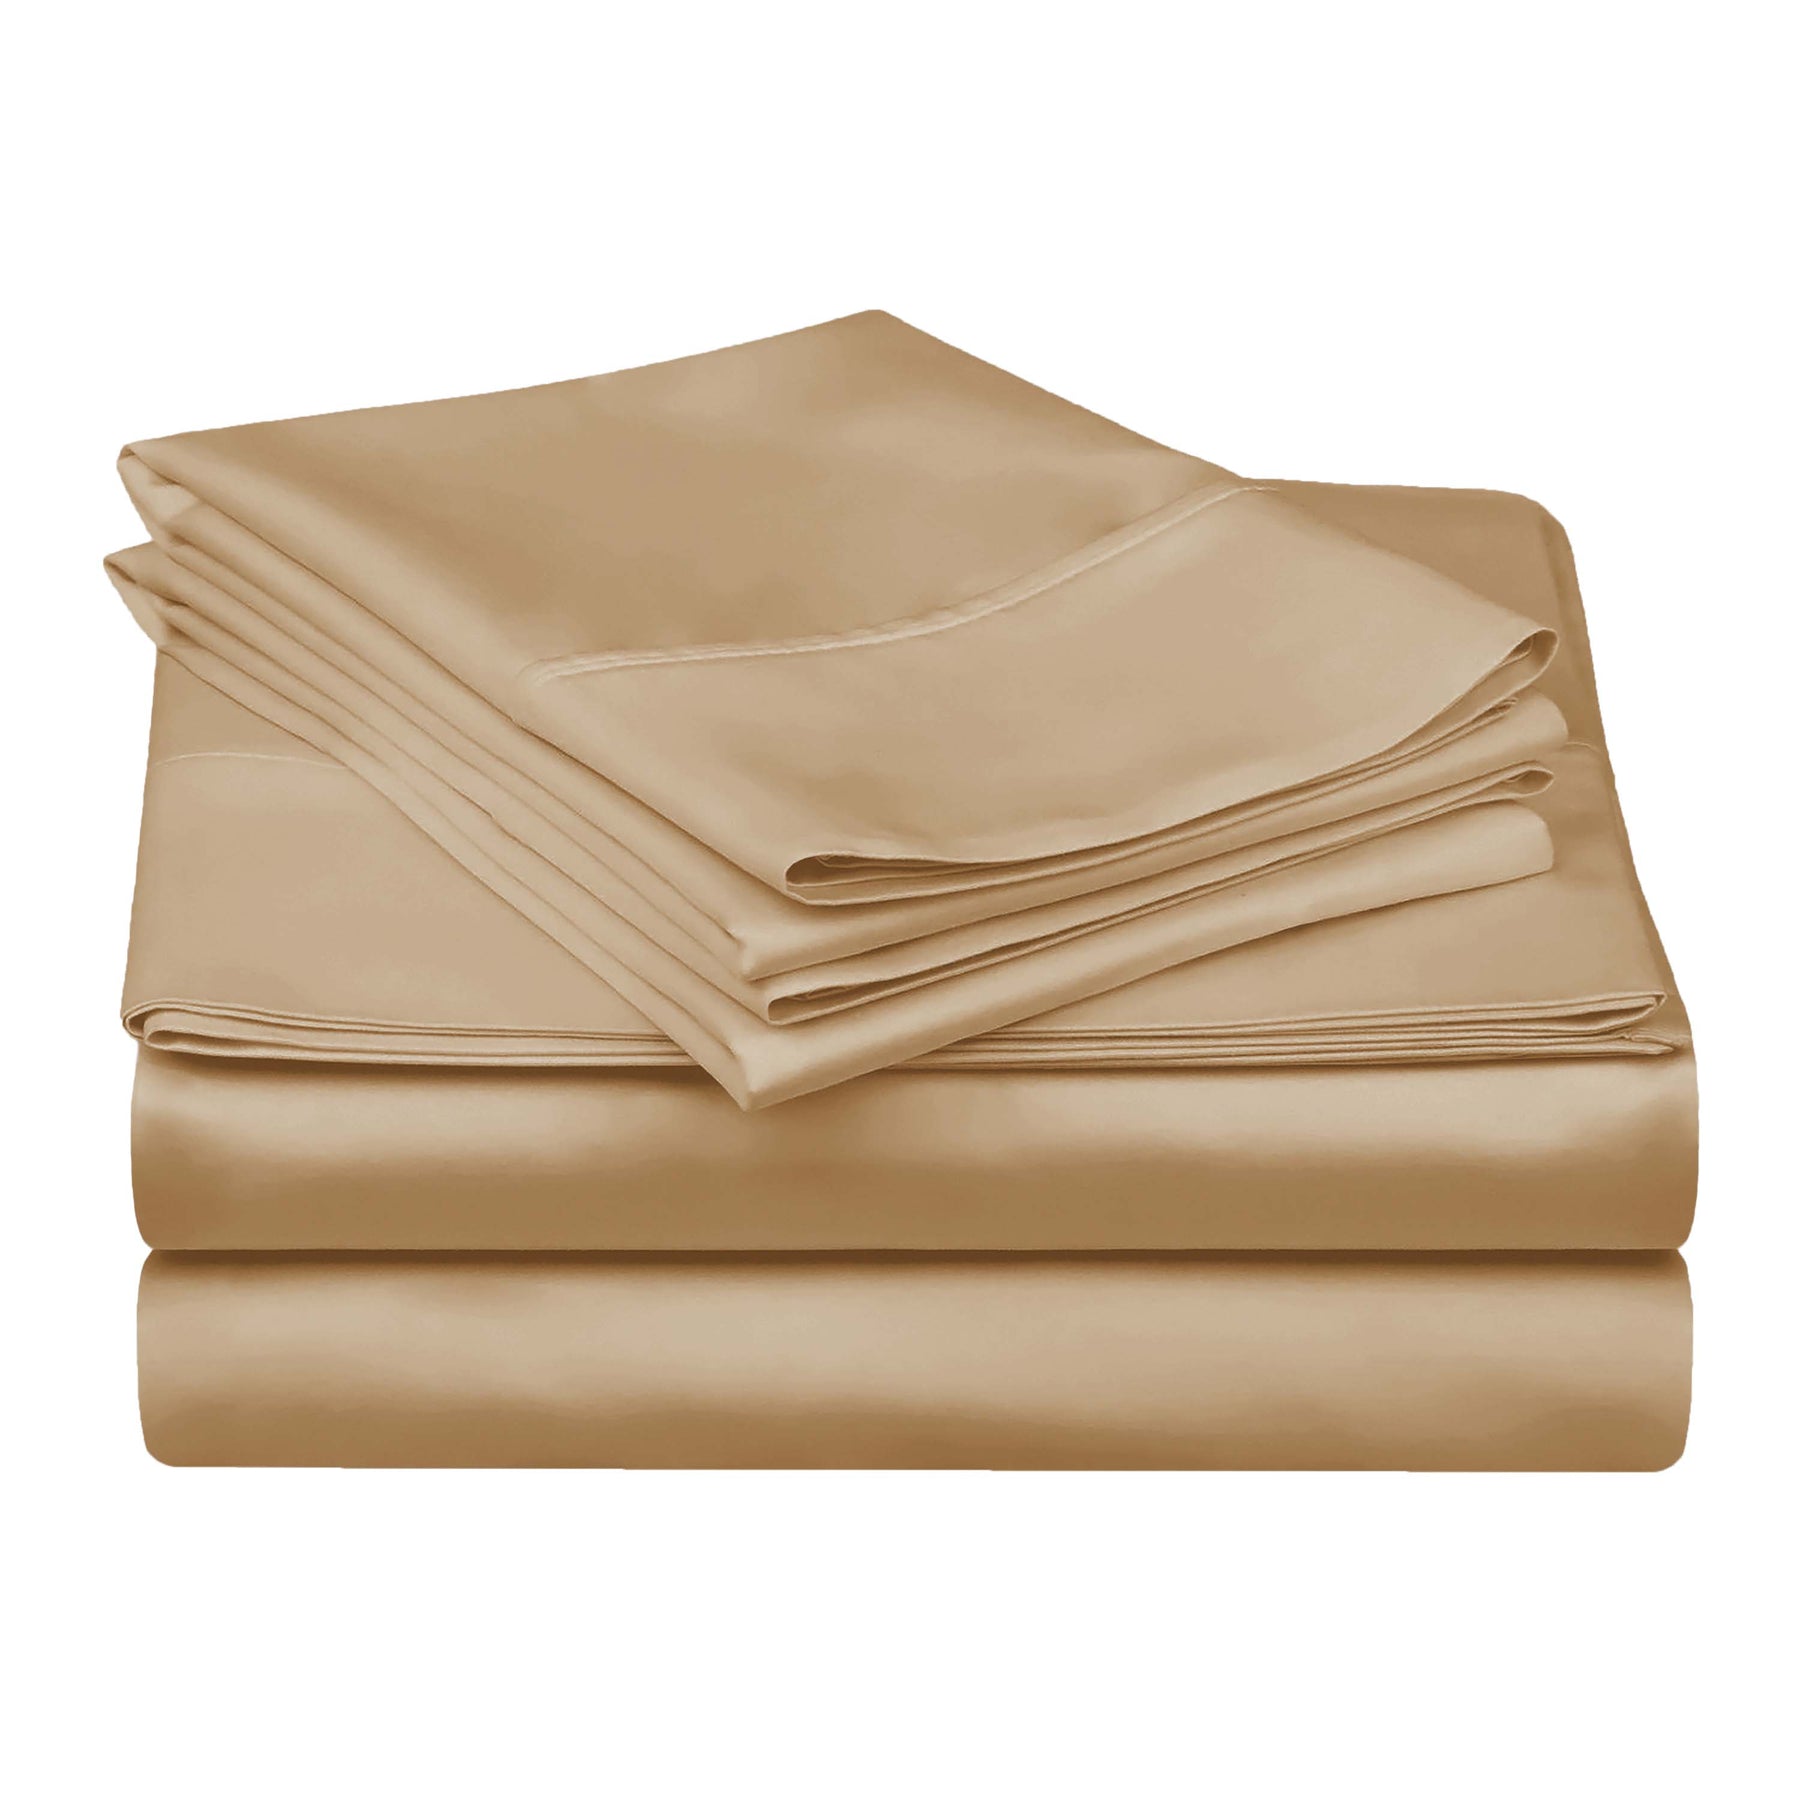 Superior Egyptian Cotton 300 Thread Count Solid Deep Pocket Bed Sheet Set - Tan